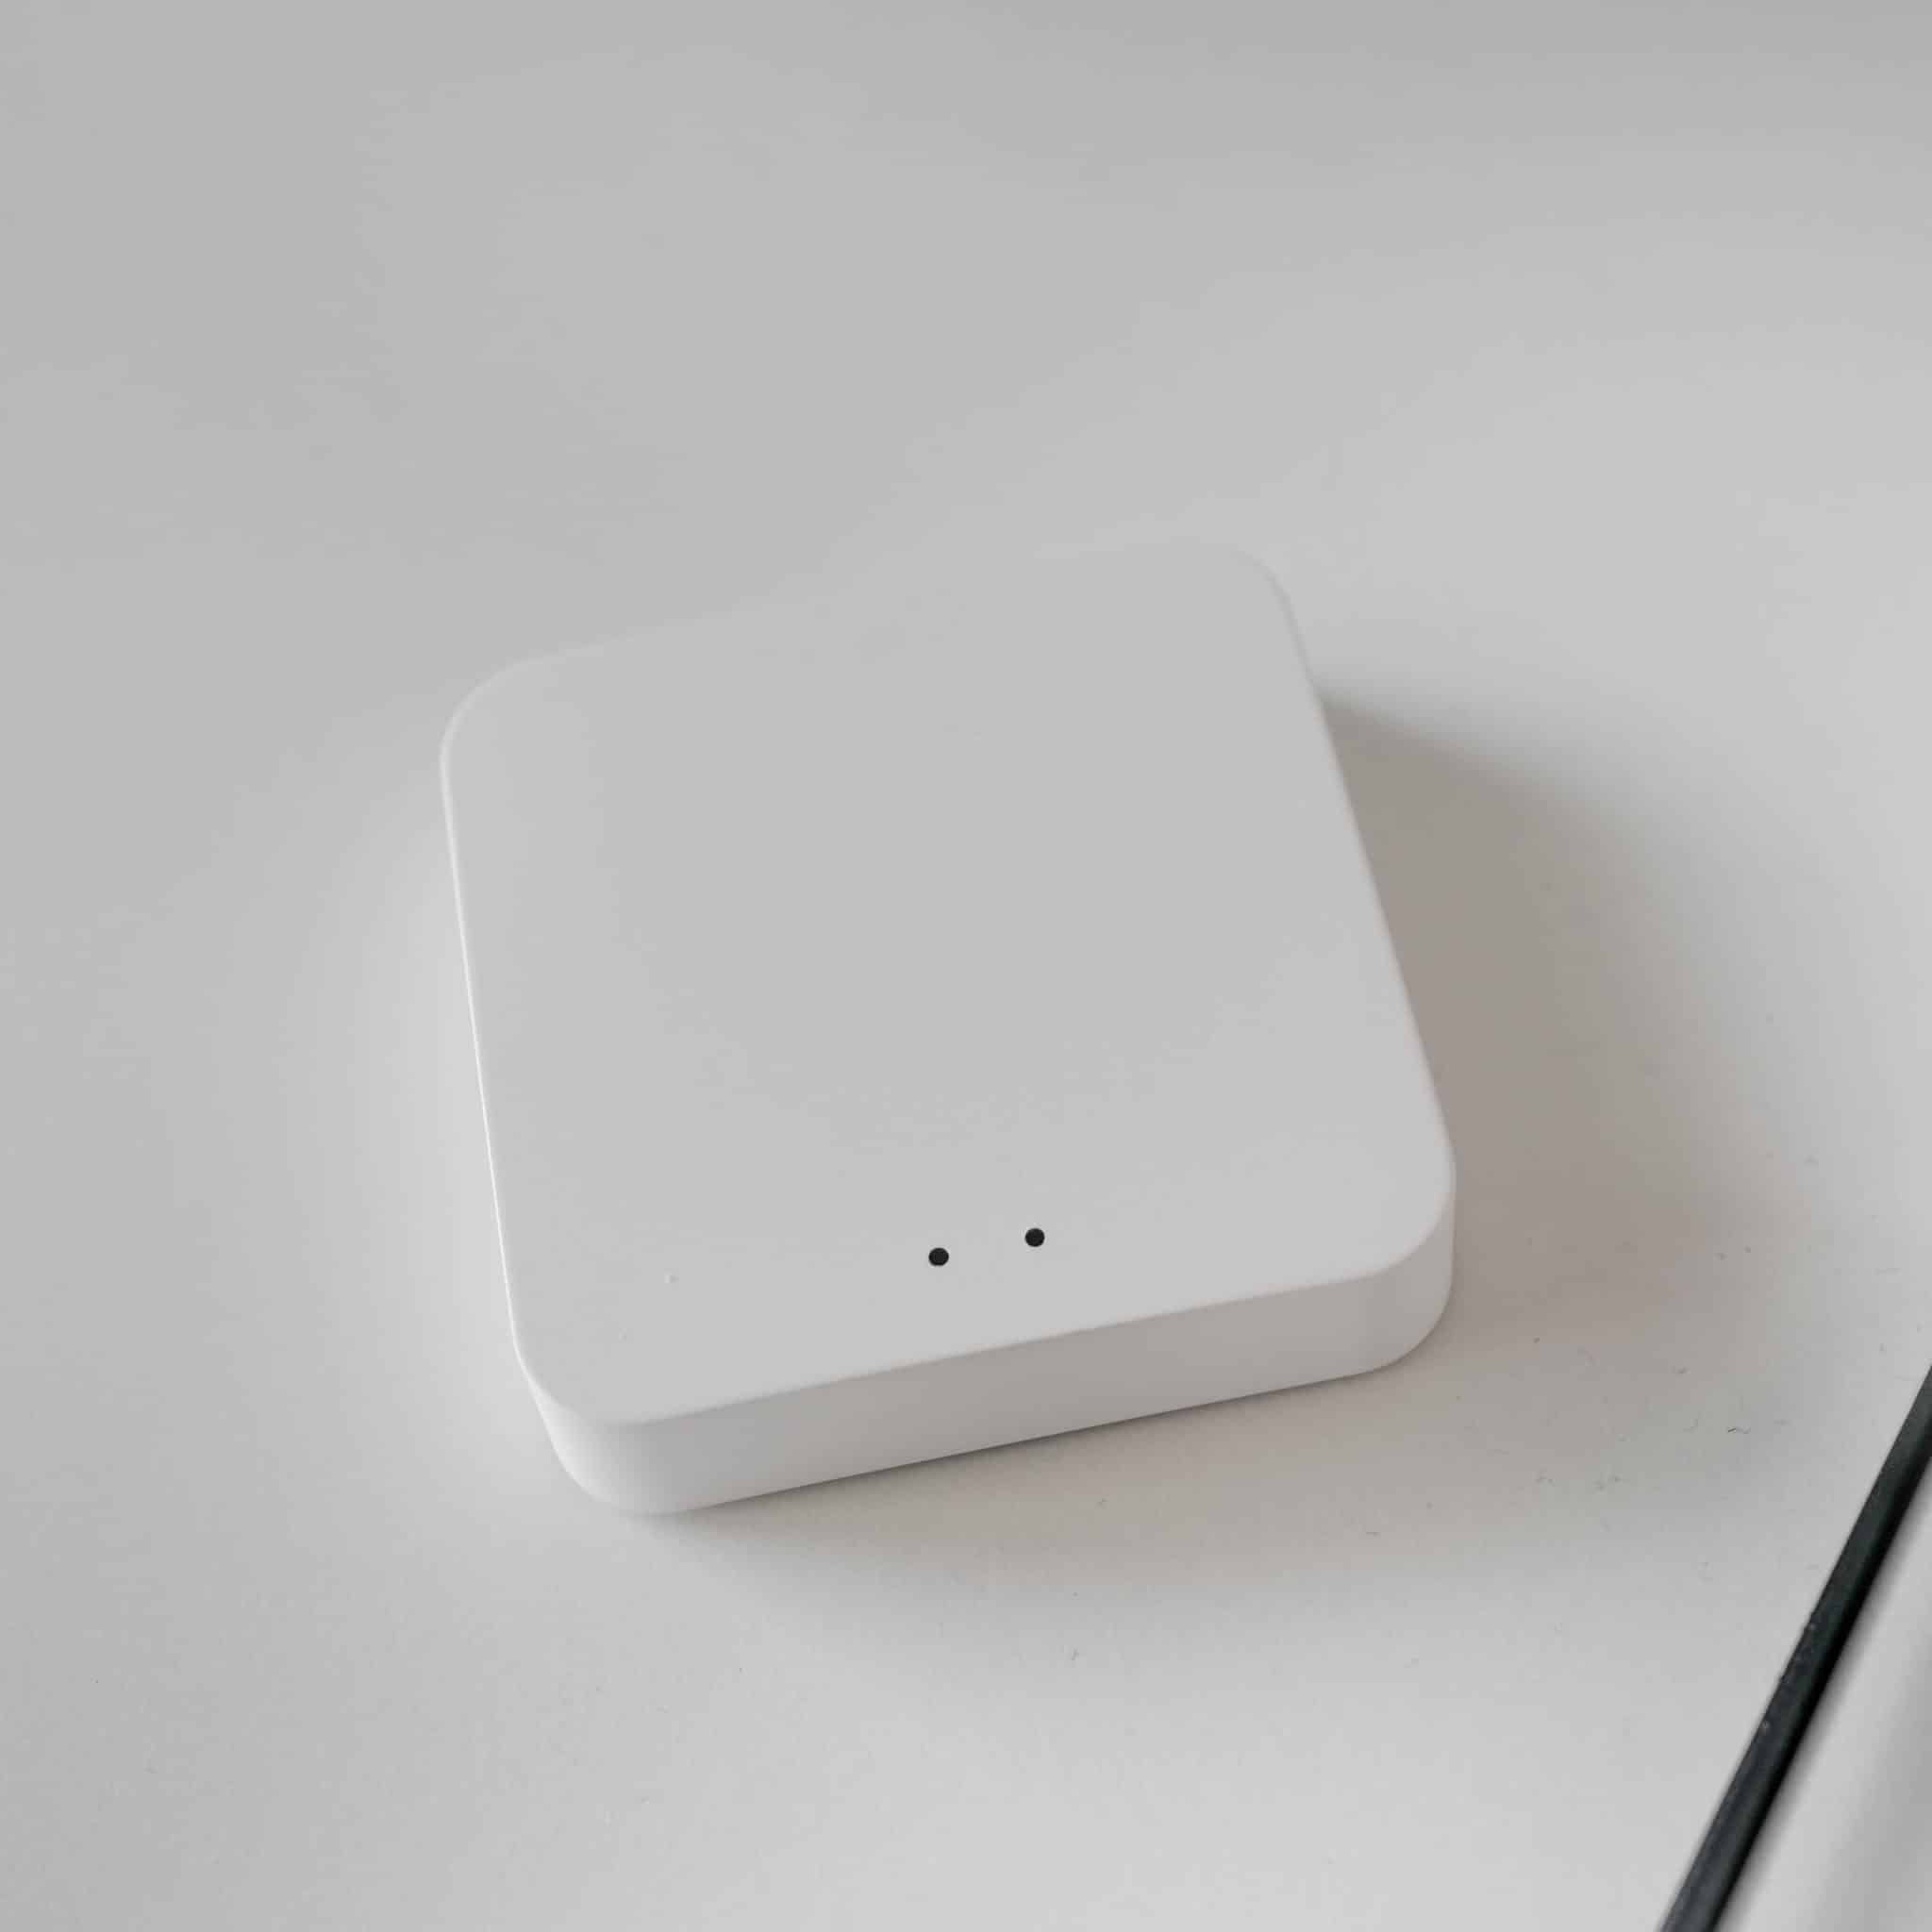 Smart home hub by seconds